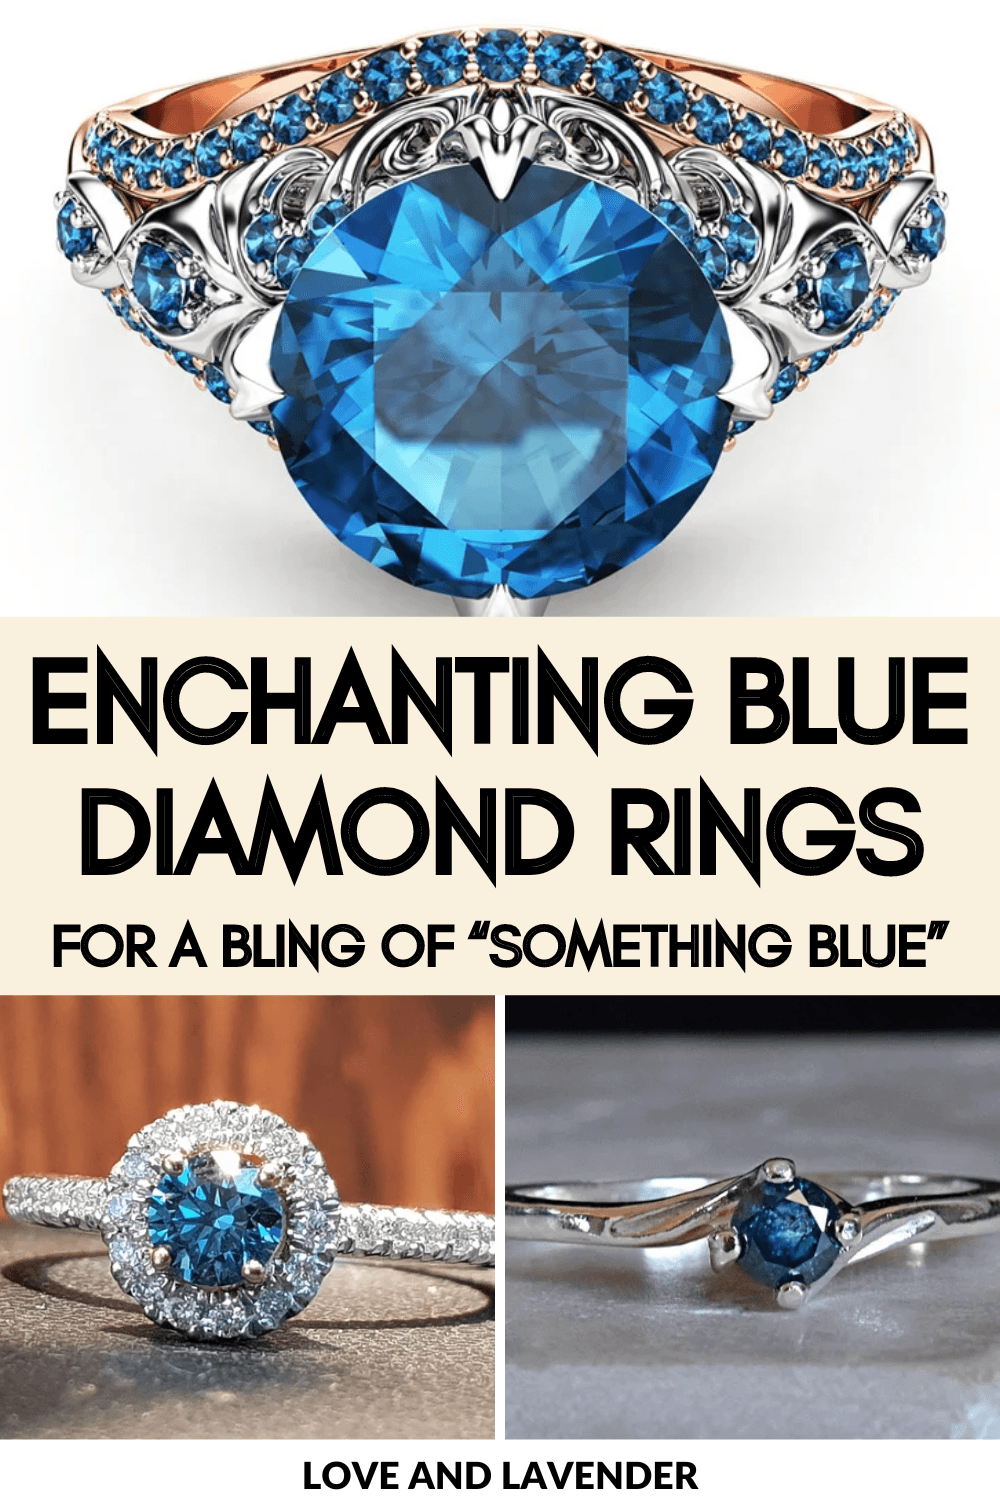 Blue diamonds have been a favorite among jewelry enthusiasts for years, and now they’re also a big deal on the fashion scene. Learn more about blue diamond rings in this article, and find out if you can get your hands on one of these beauties for yourself!